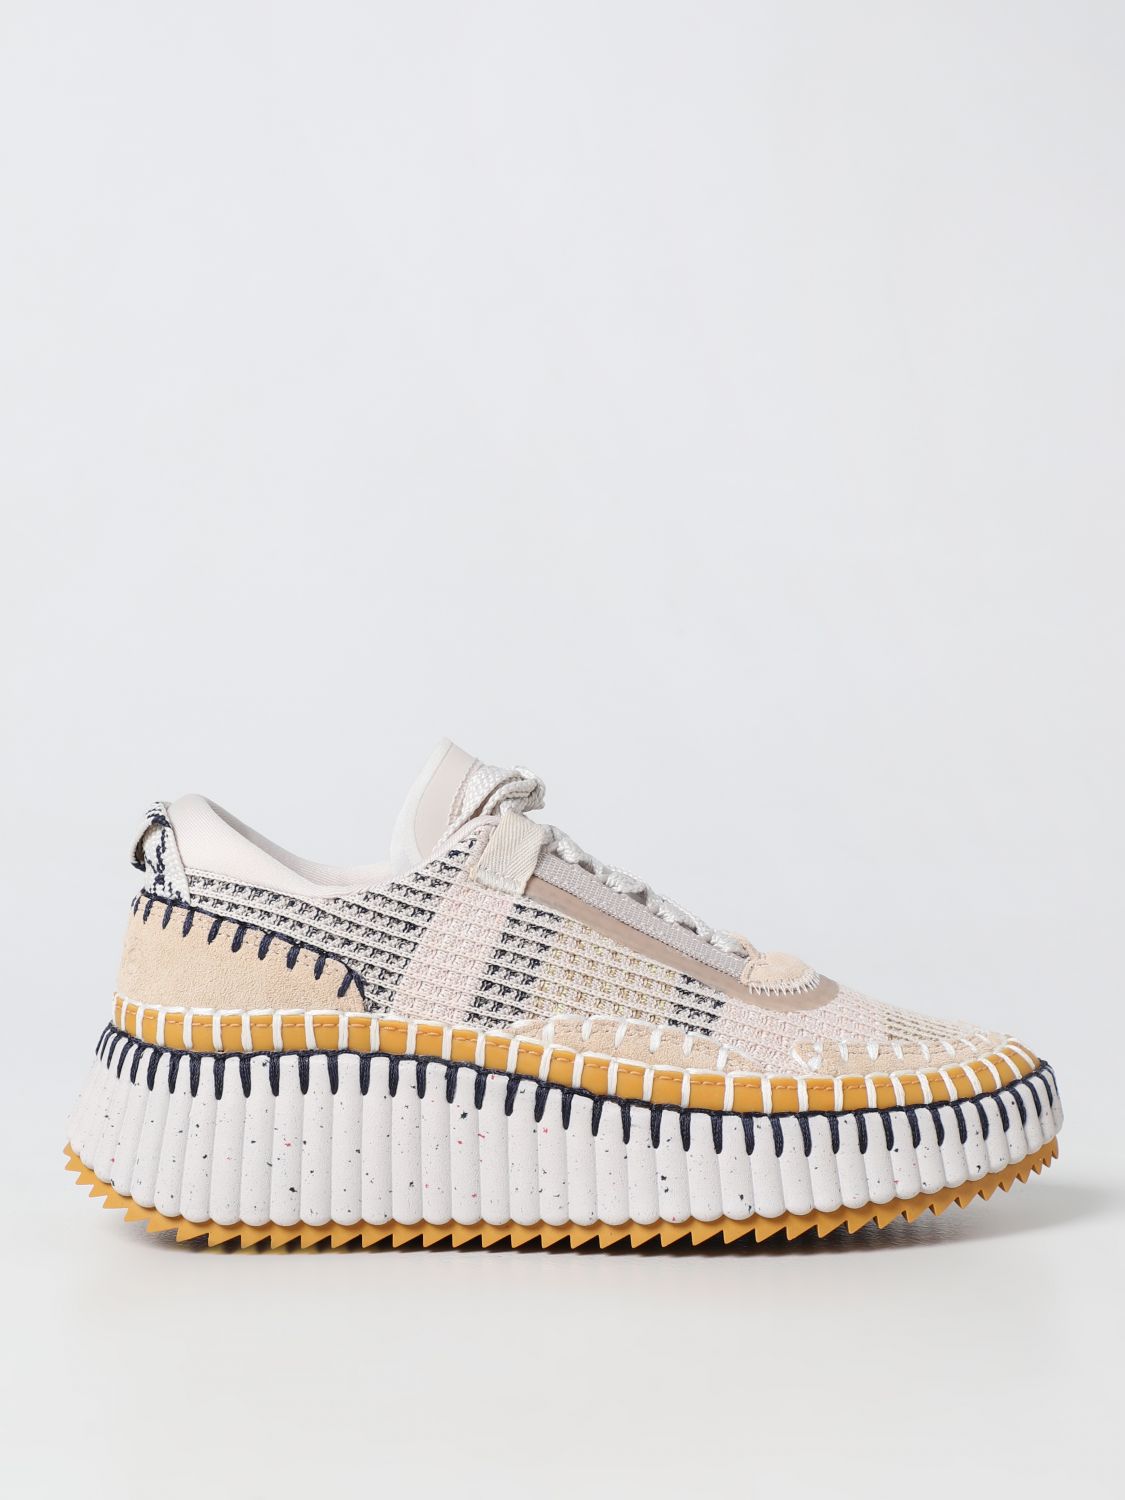 CHLOÉ NAMA SNEAKERS IN KNIT AND SUEDE,E44153005